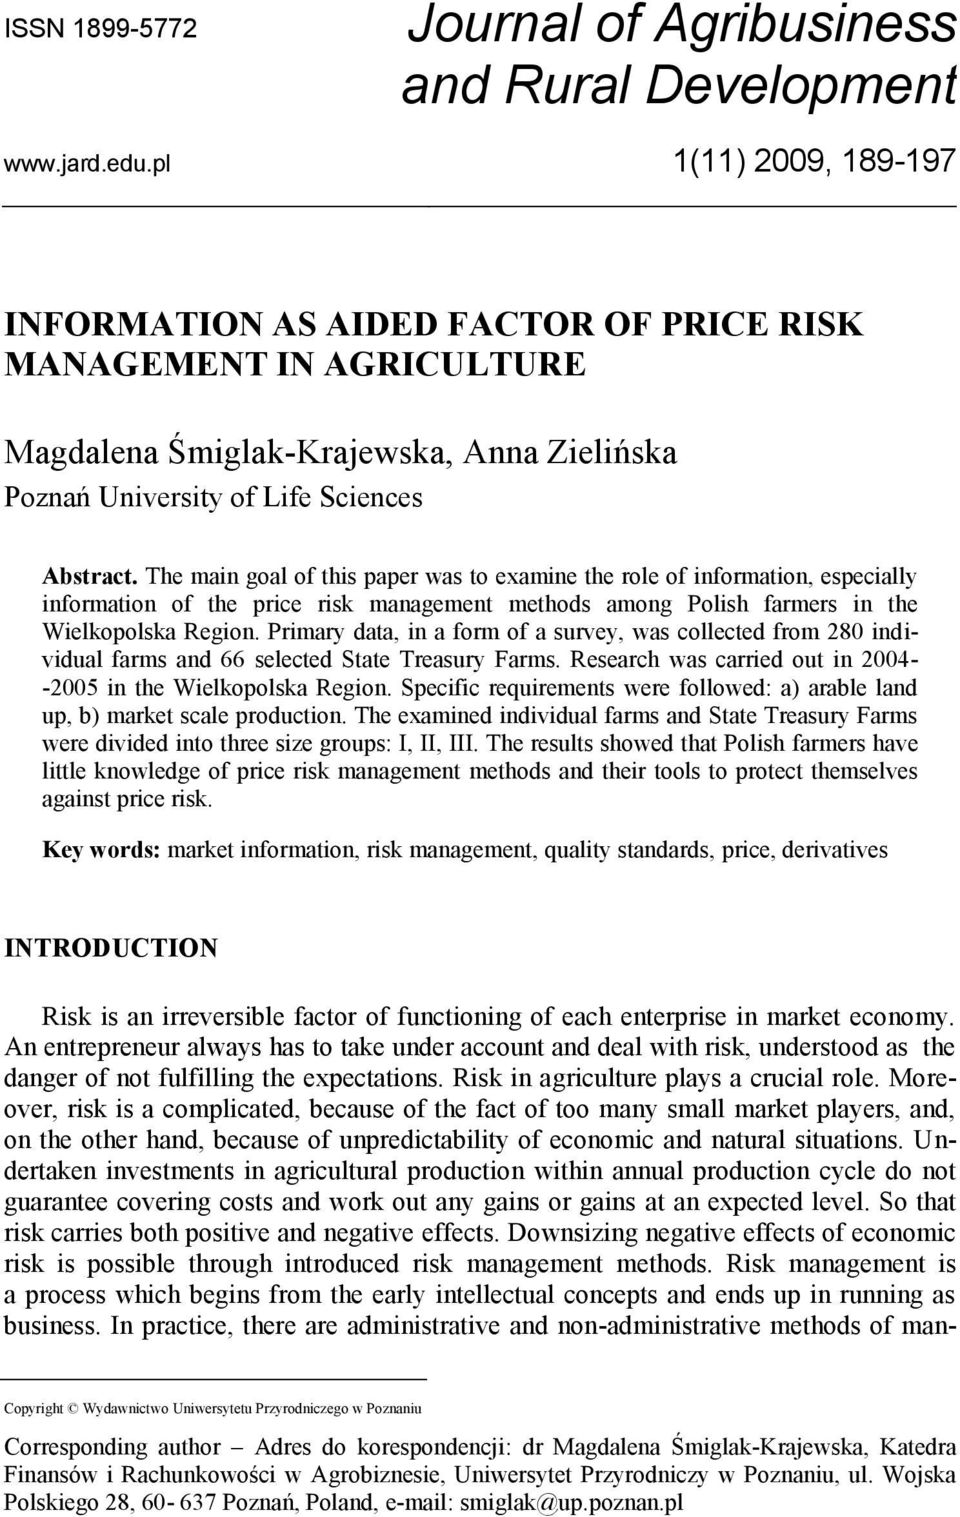 The main goal of this paper was to examine the role of information, especially information of the price risk management methods among Polish farmers in the Wielkopolska Region.